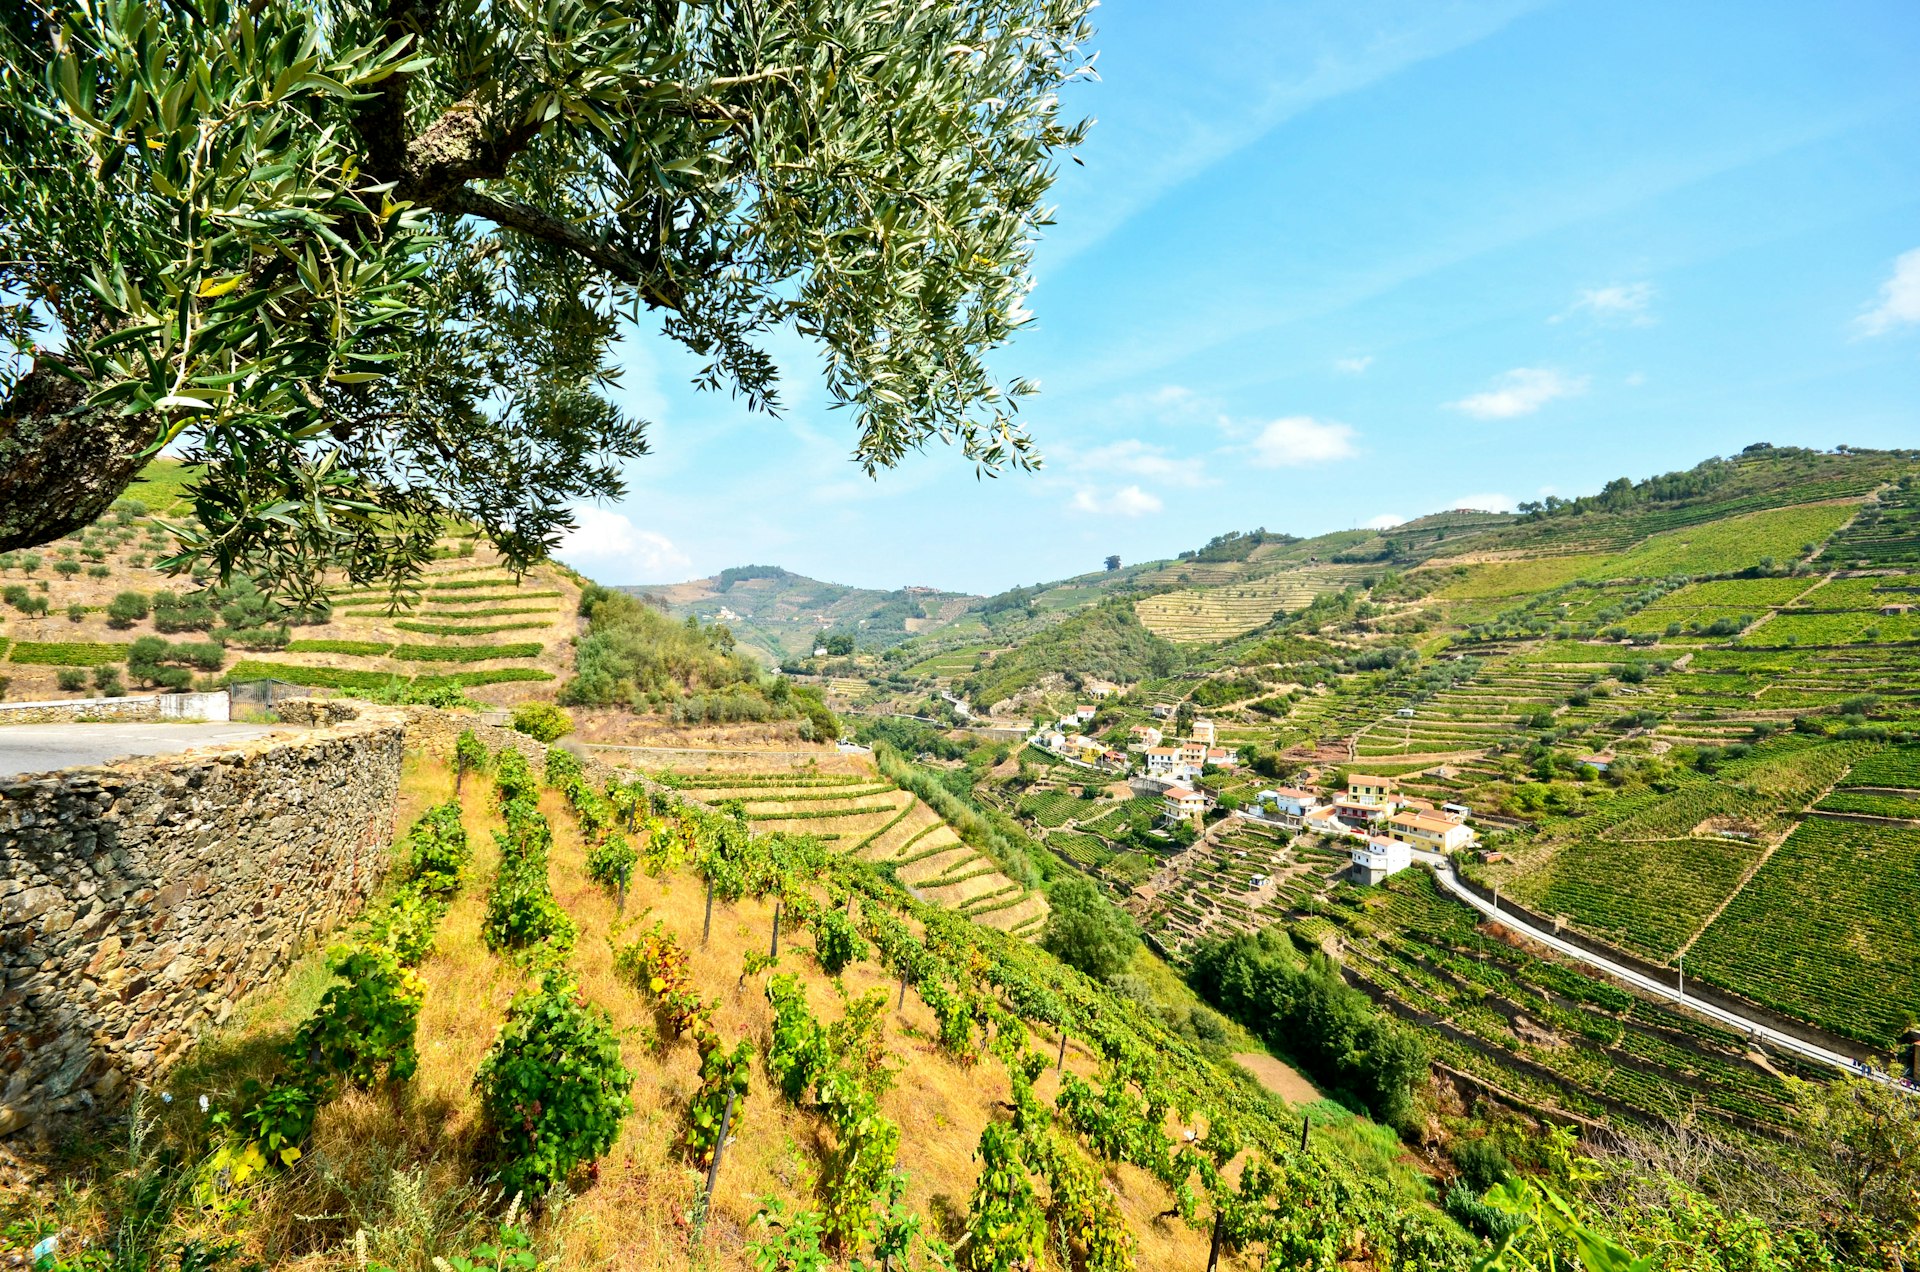 A road passes through hillsides covered with vines